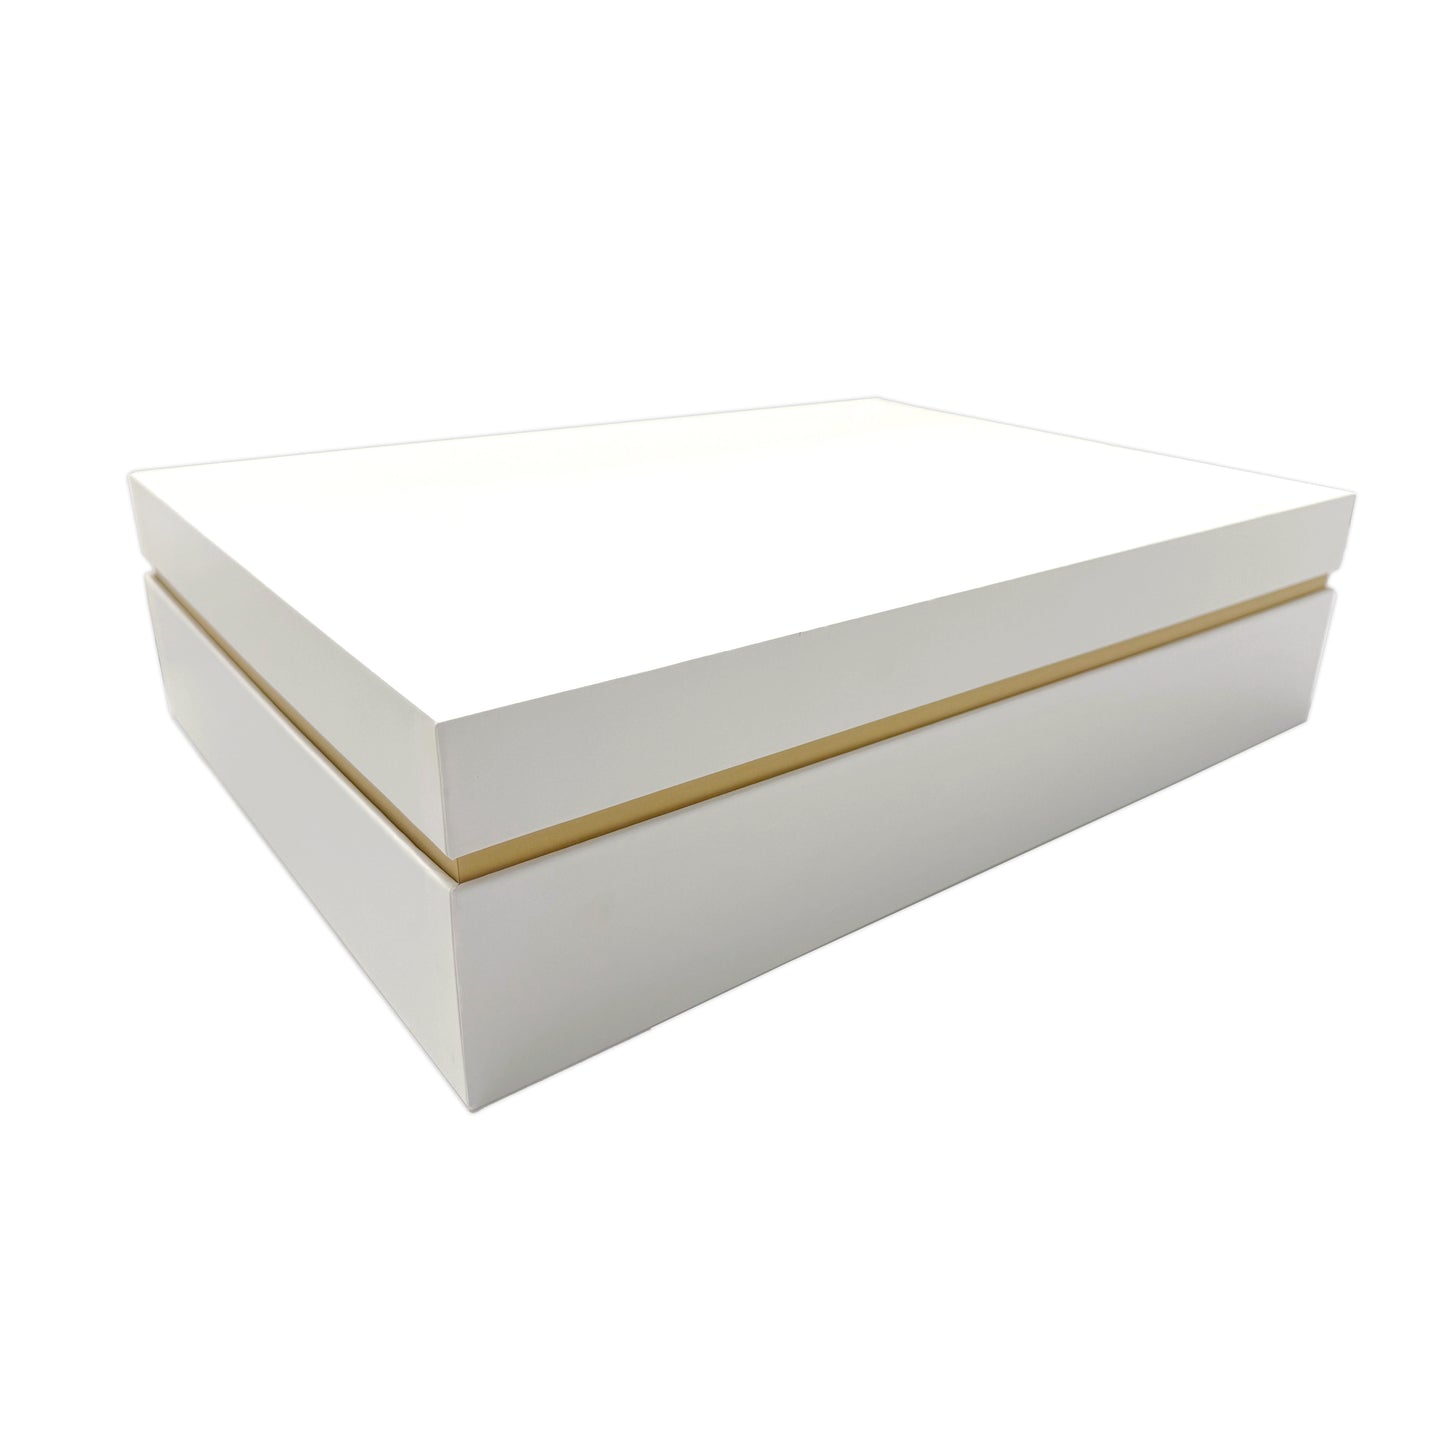 PEARL WHITE AND COFFEE-COLORED RIBBON RECTANGULAR GIFT BOX